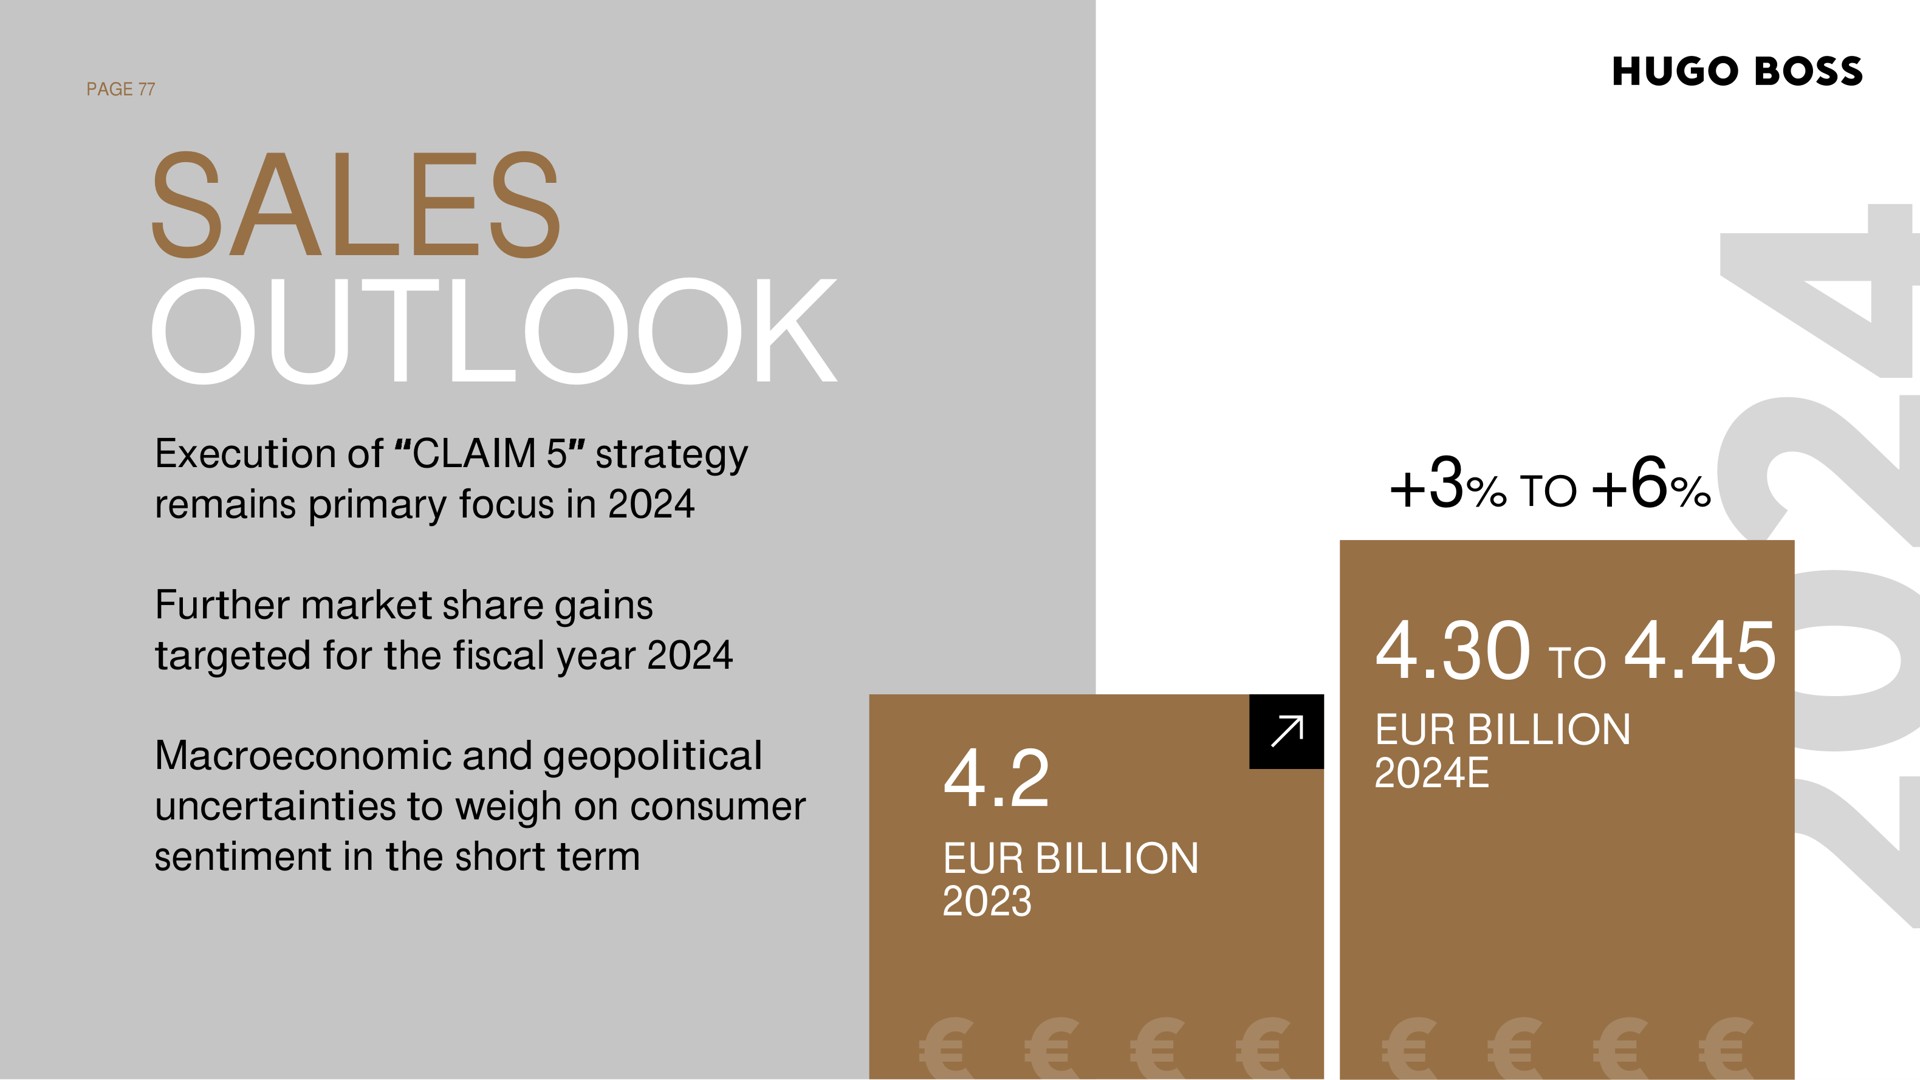 sales outlook to to billion billion boss further market share gains targeted for the fiscal year execution of claim strategy remains primary focus in sentiment in the short term aes and geopolitical uncertainties weigh on consumer | Hugo Boss